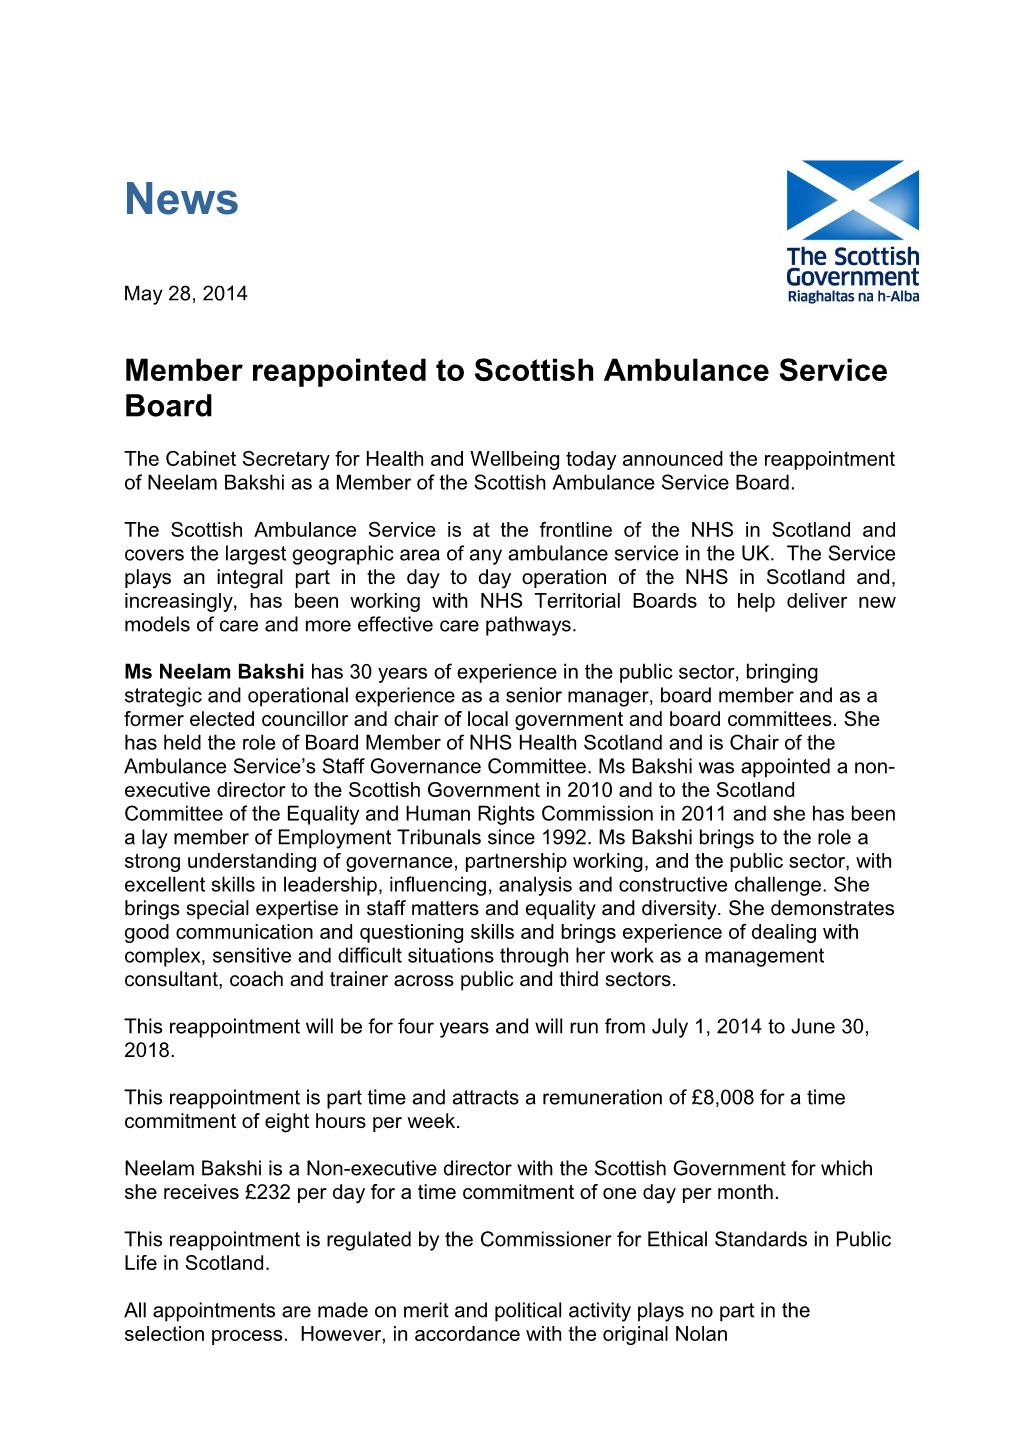 Member Reappointed to Scottish Ambulance Service Board